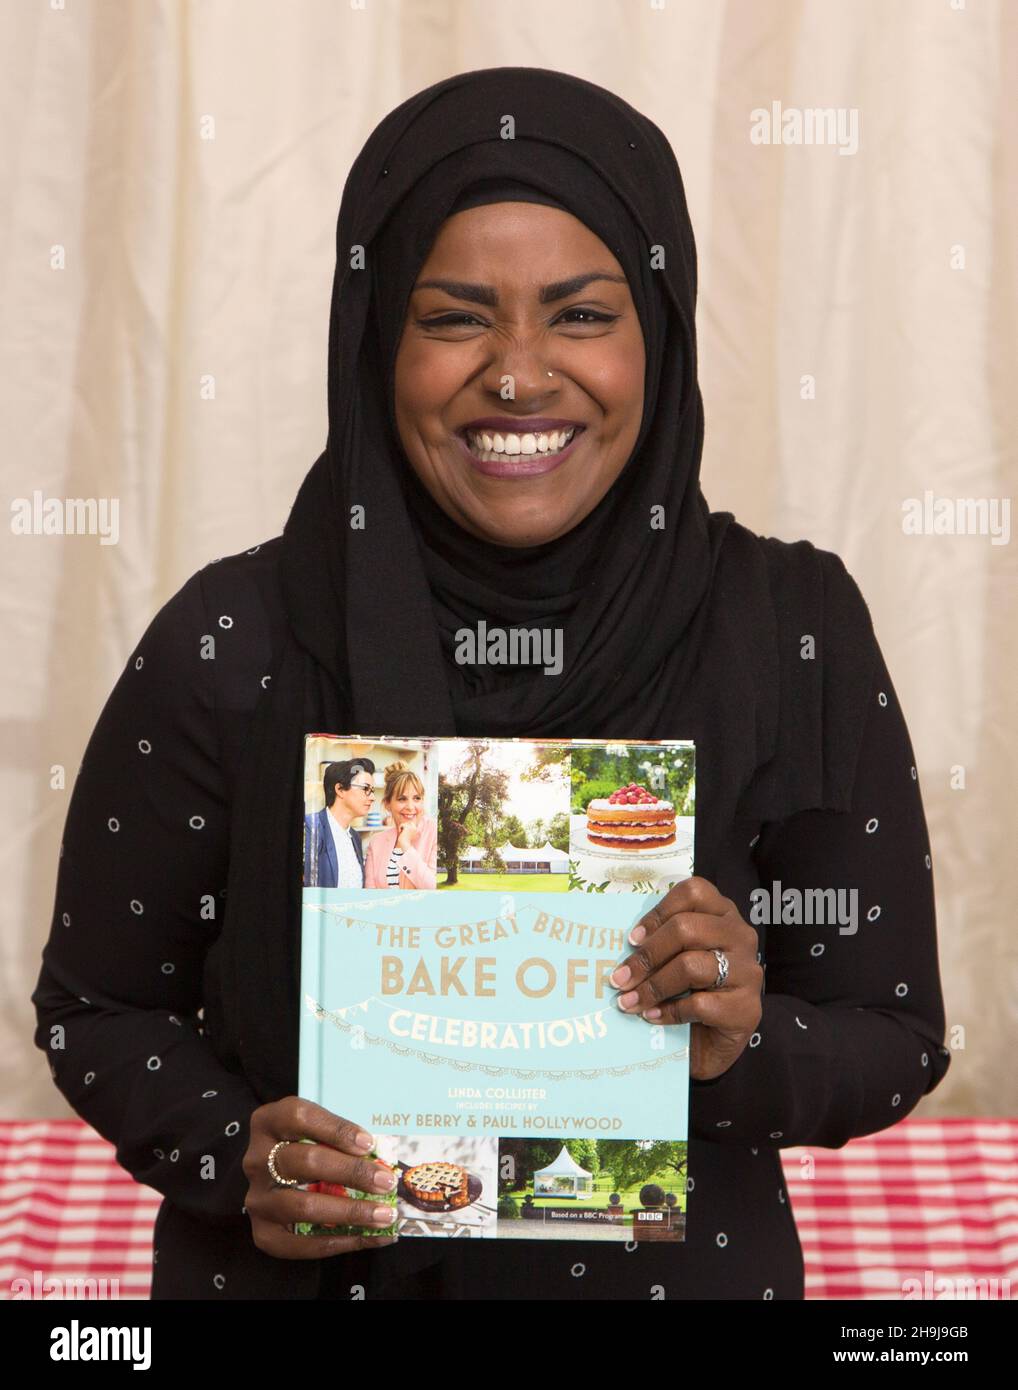 Nadiya Hussain, winner of the BBC series The Great British Bake Off, poses for photos at the Picaddilly branch of Waterstones in London before a book-signing after the announcement of the winner yesterday. Stock Photo